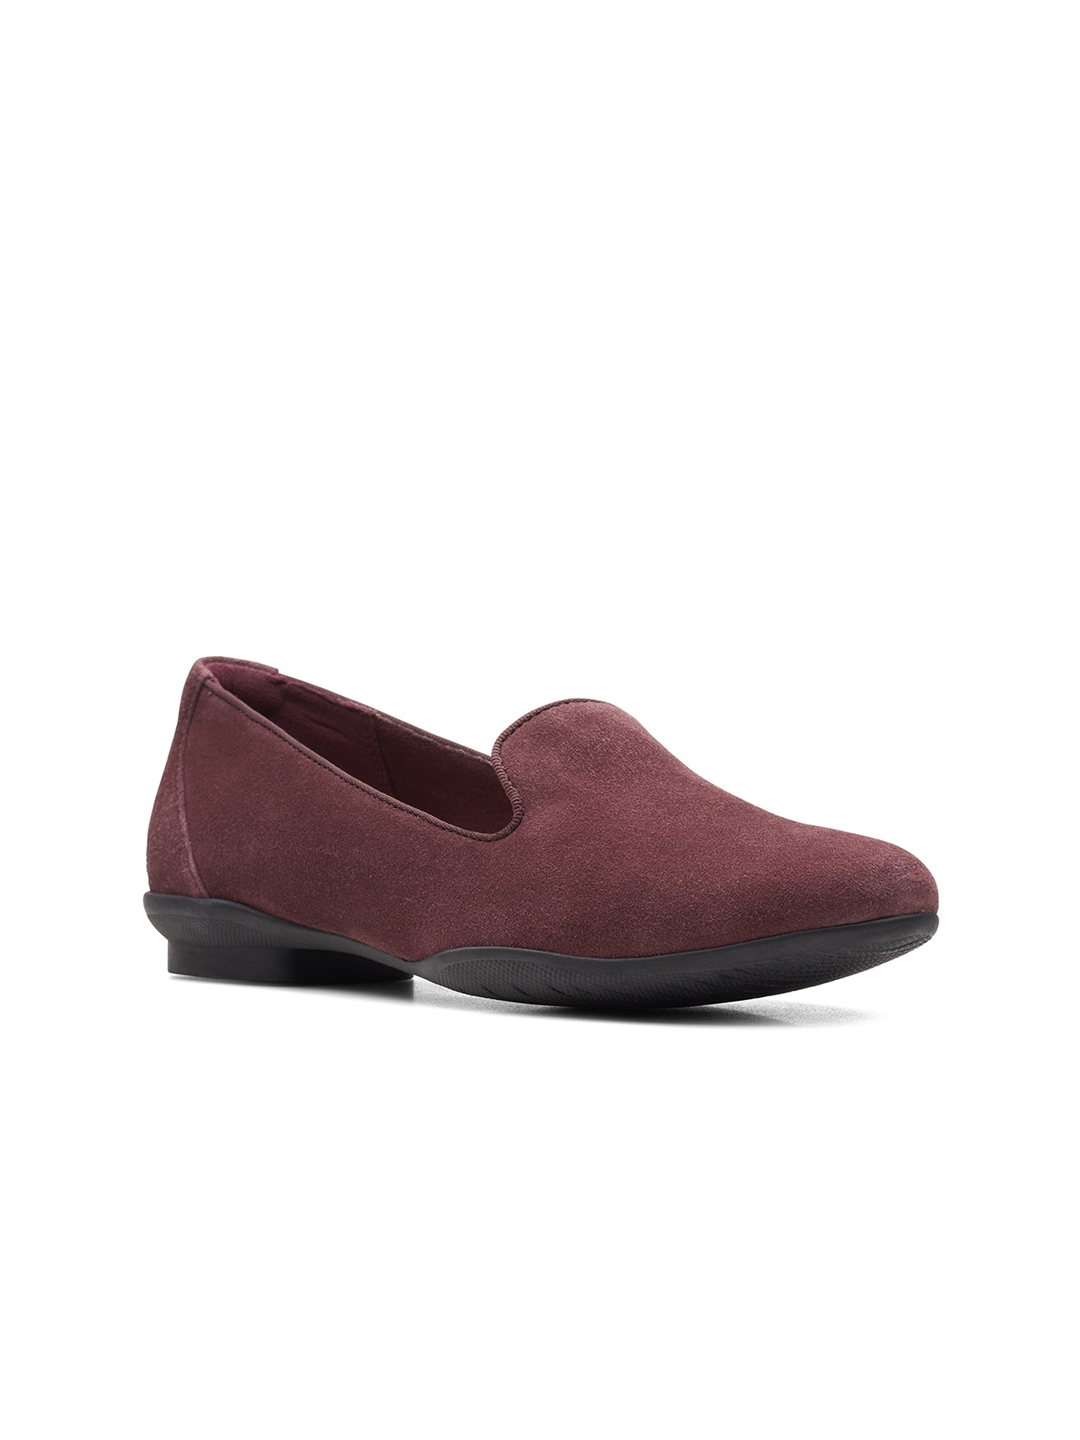 Buy Clarks Women Burgundy Suede Slip On Sneakers - Casual Shoes for ...